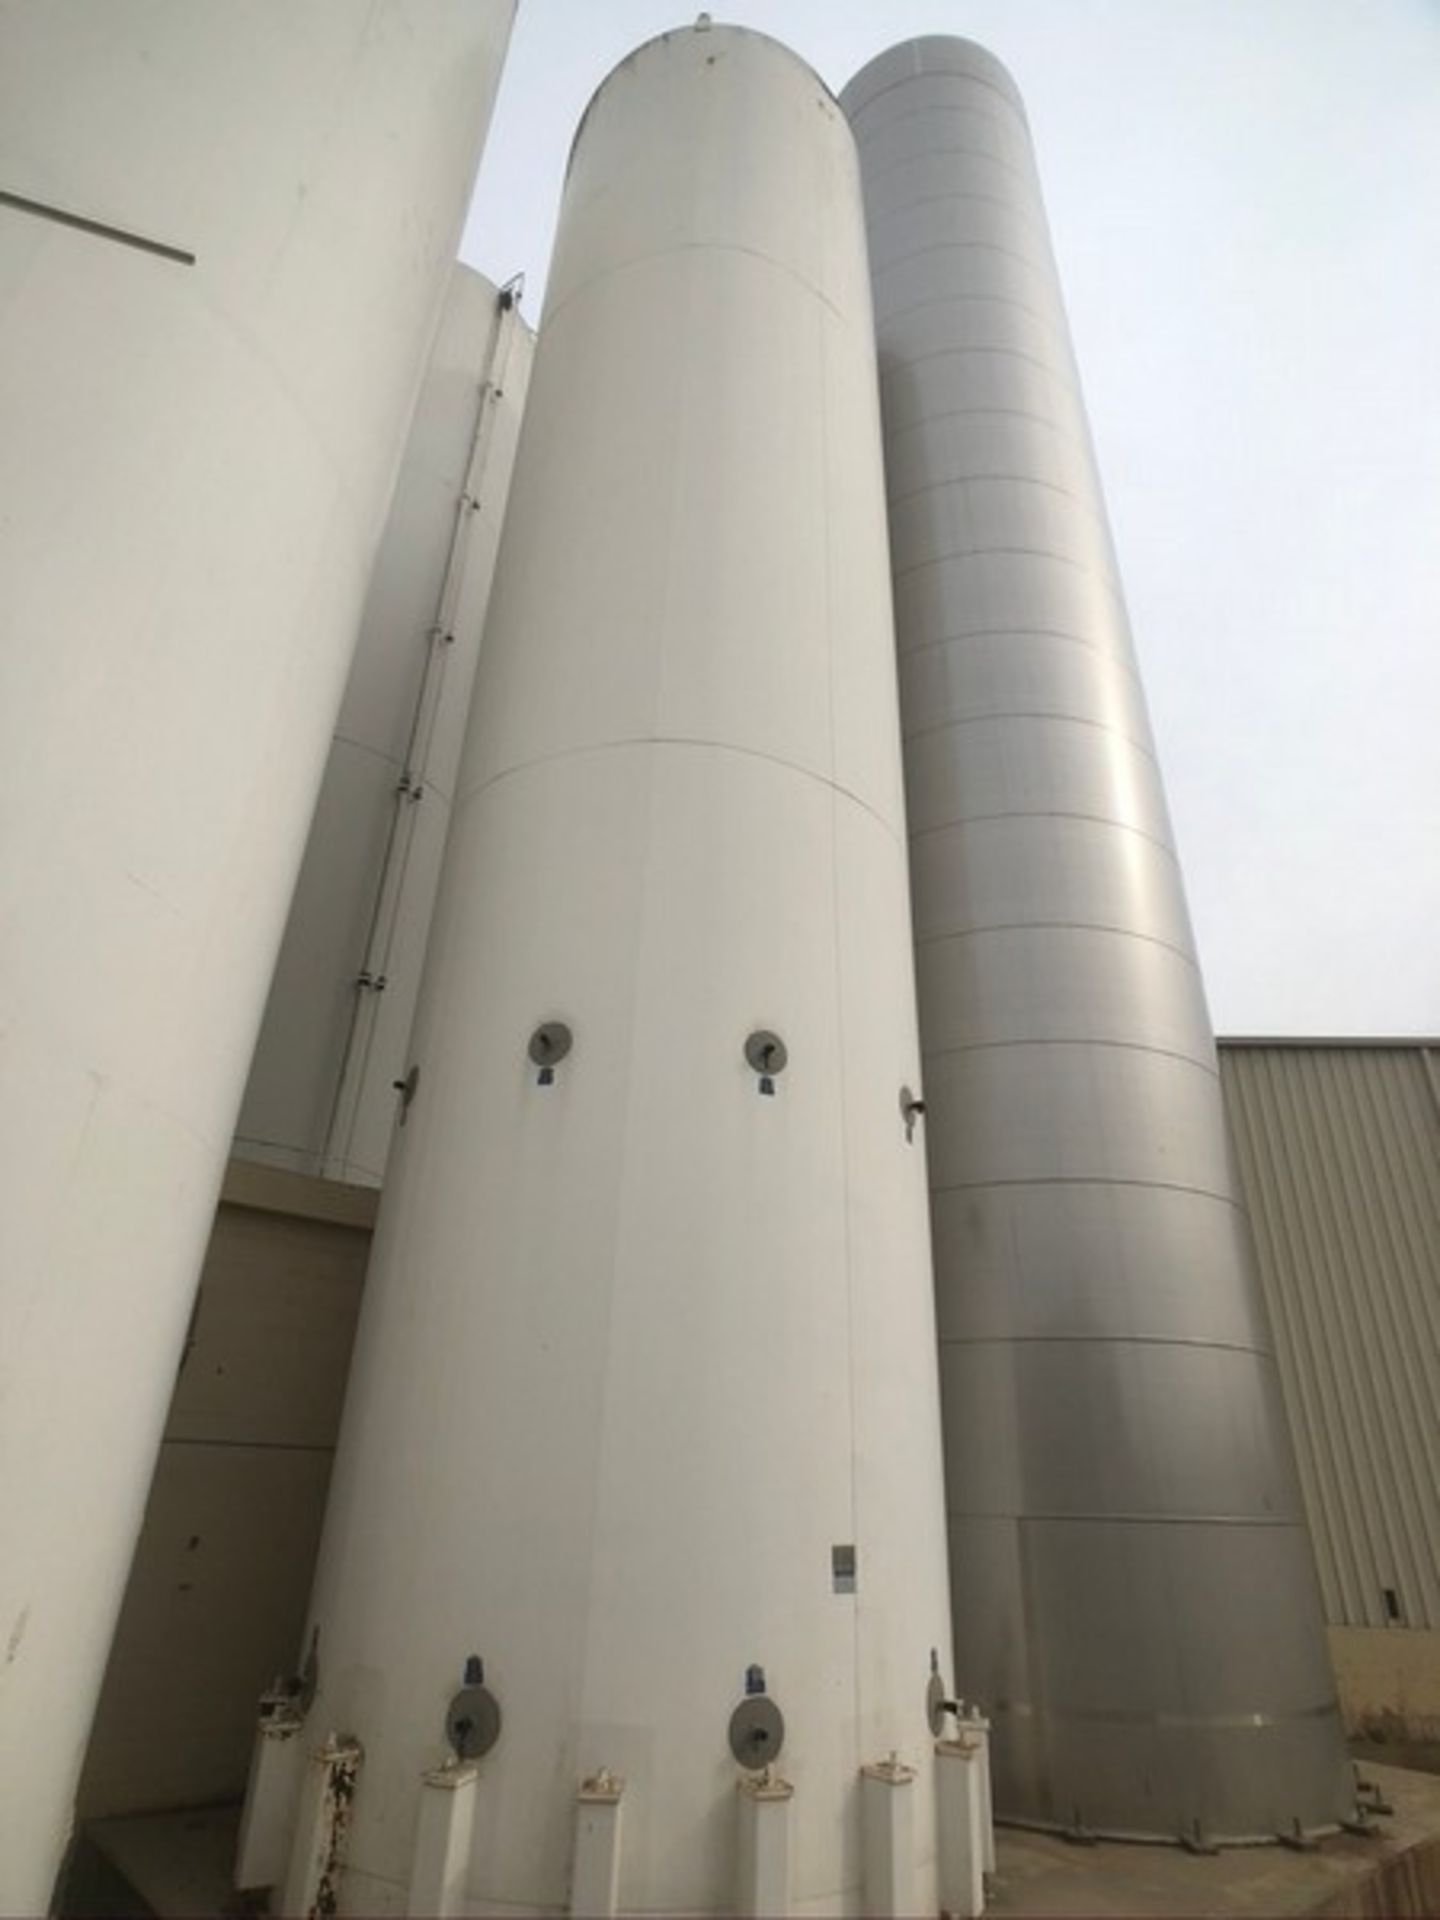 MUELLER 40,000 GALLON JACKETED SILO , S/N 324951-1